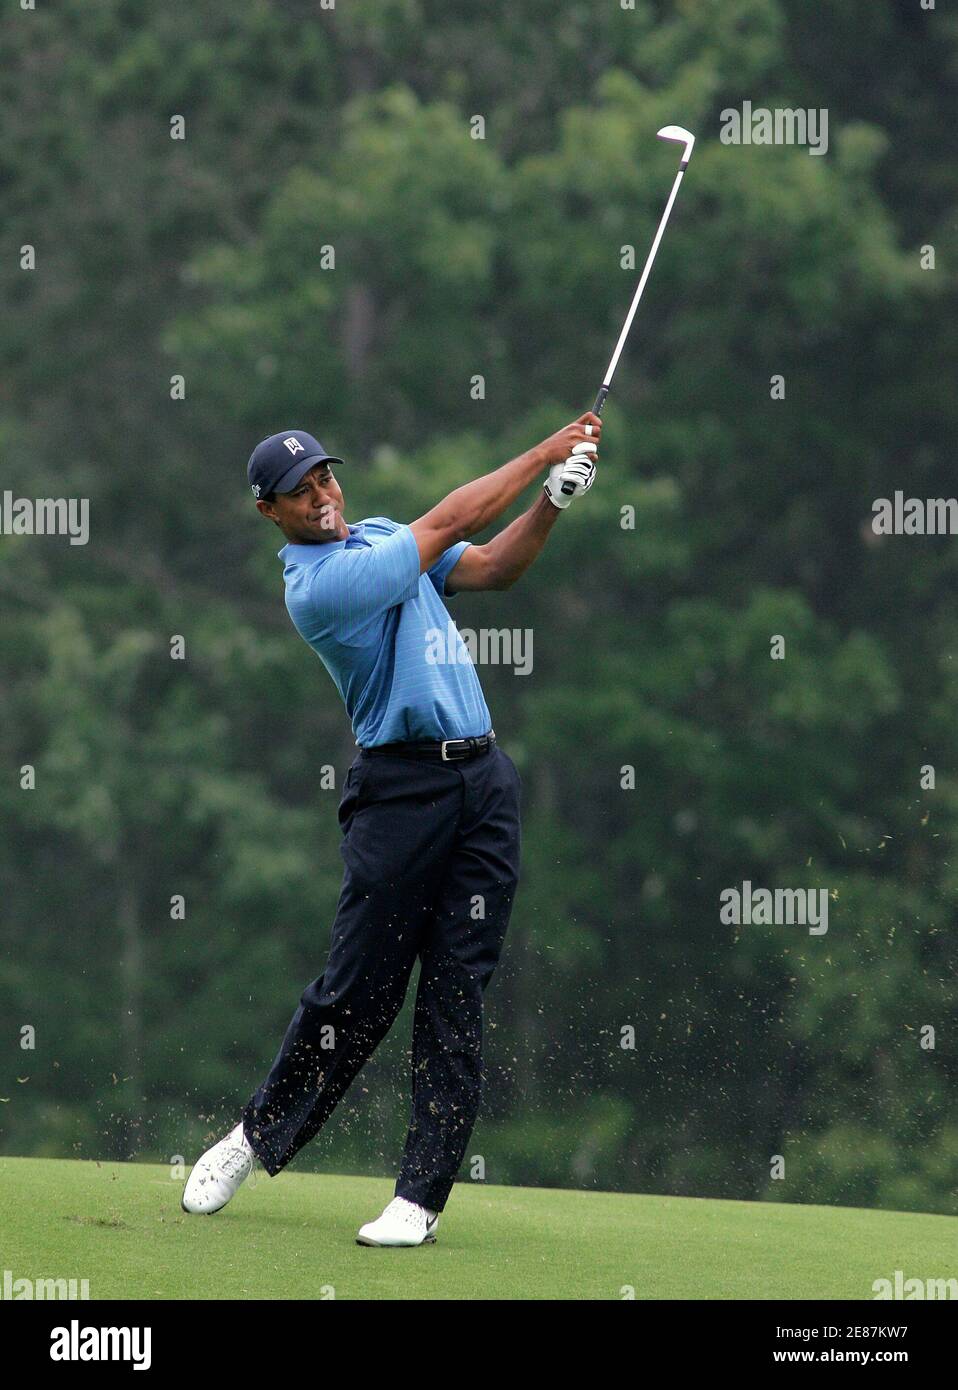 Tiger Woods hits off of the 15th fairway during the first round of play at The Players Championship golf tournament in Ponte Vedra Beach, Florida May 10, 2007. REUTERS/Rick Fowler (UNITED STATES) Stock Photo